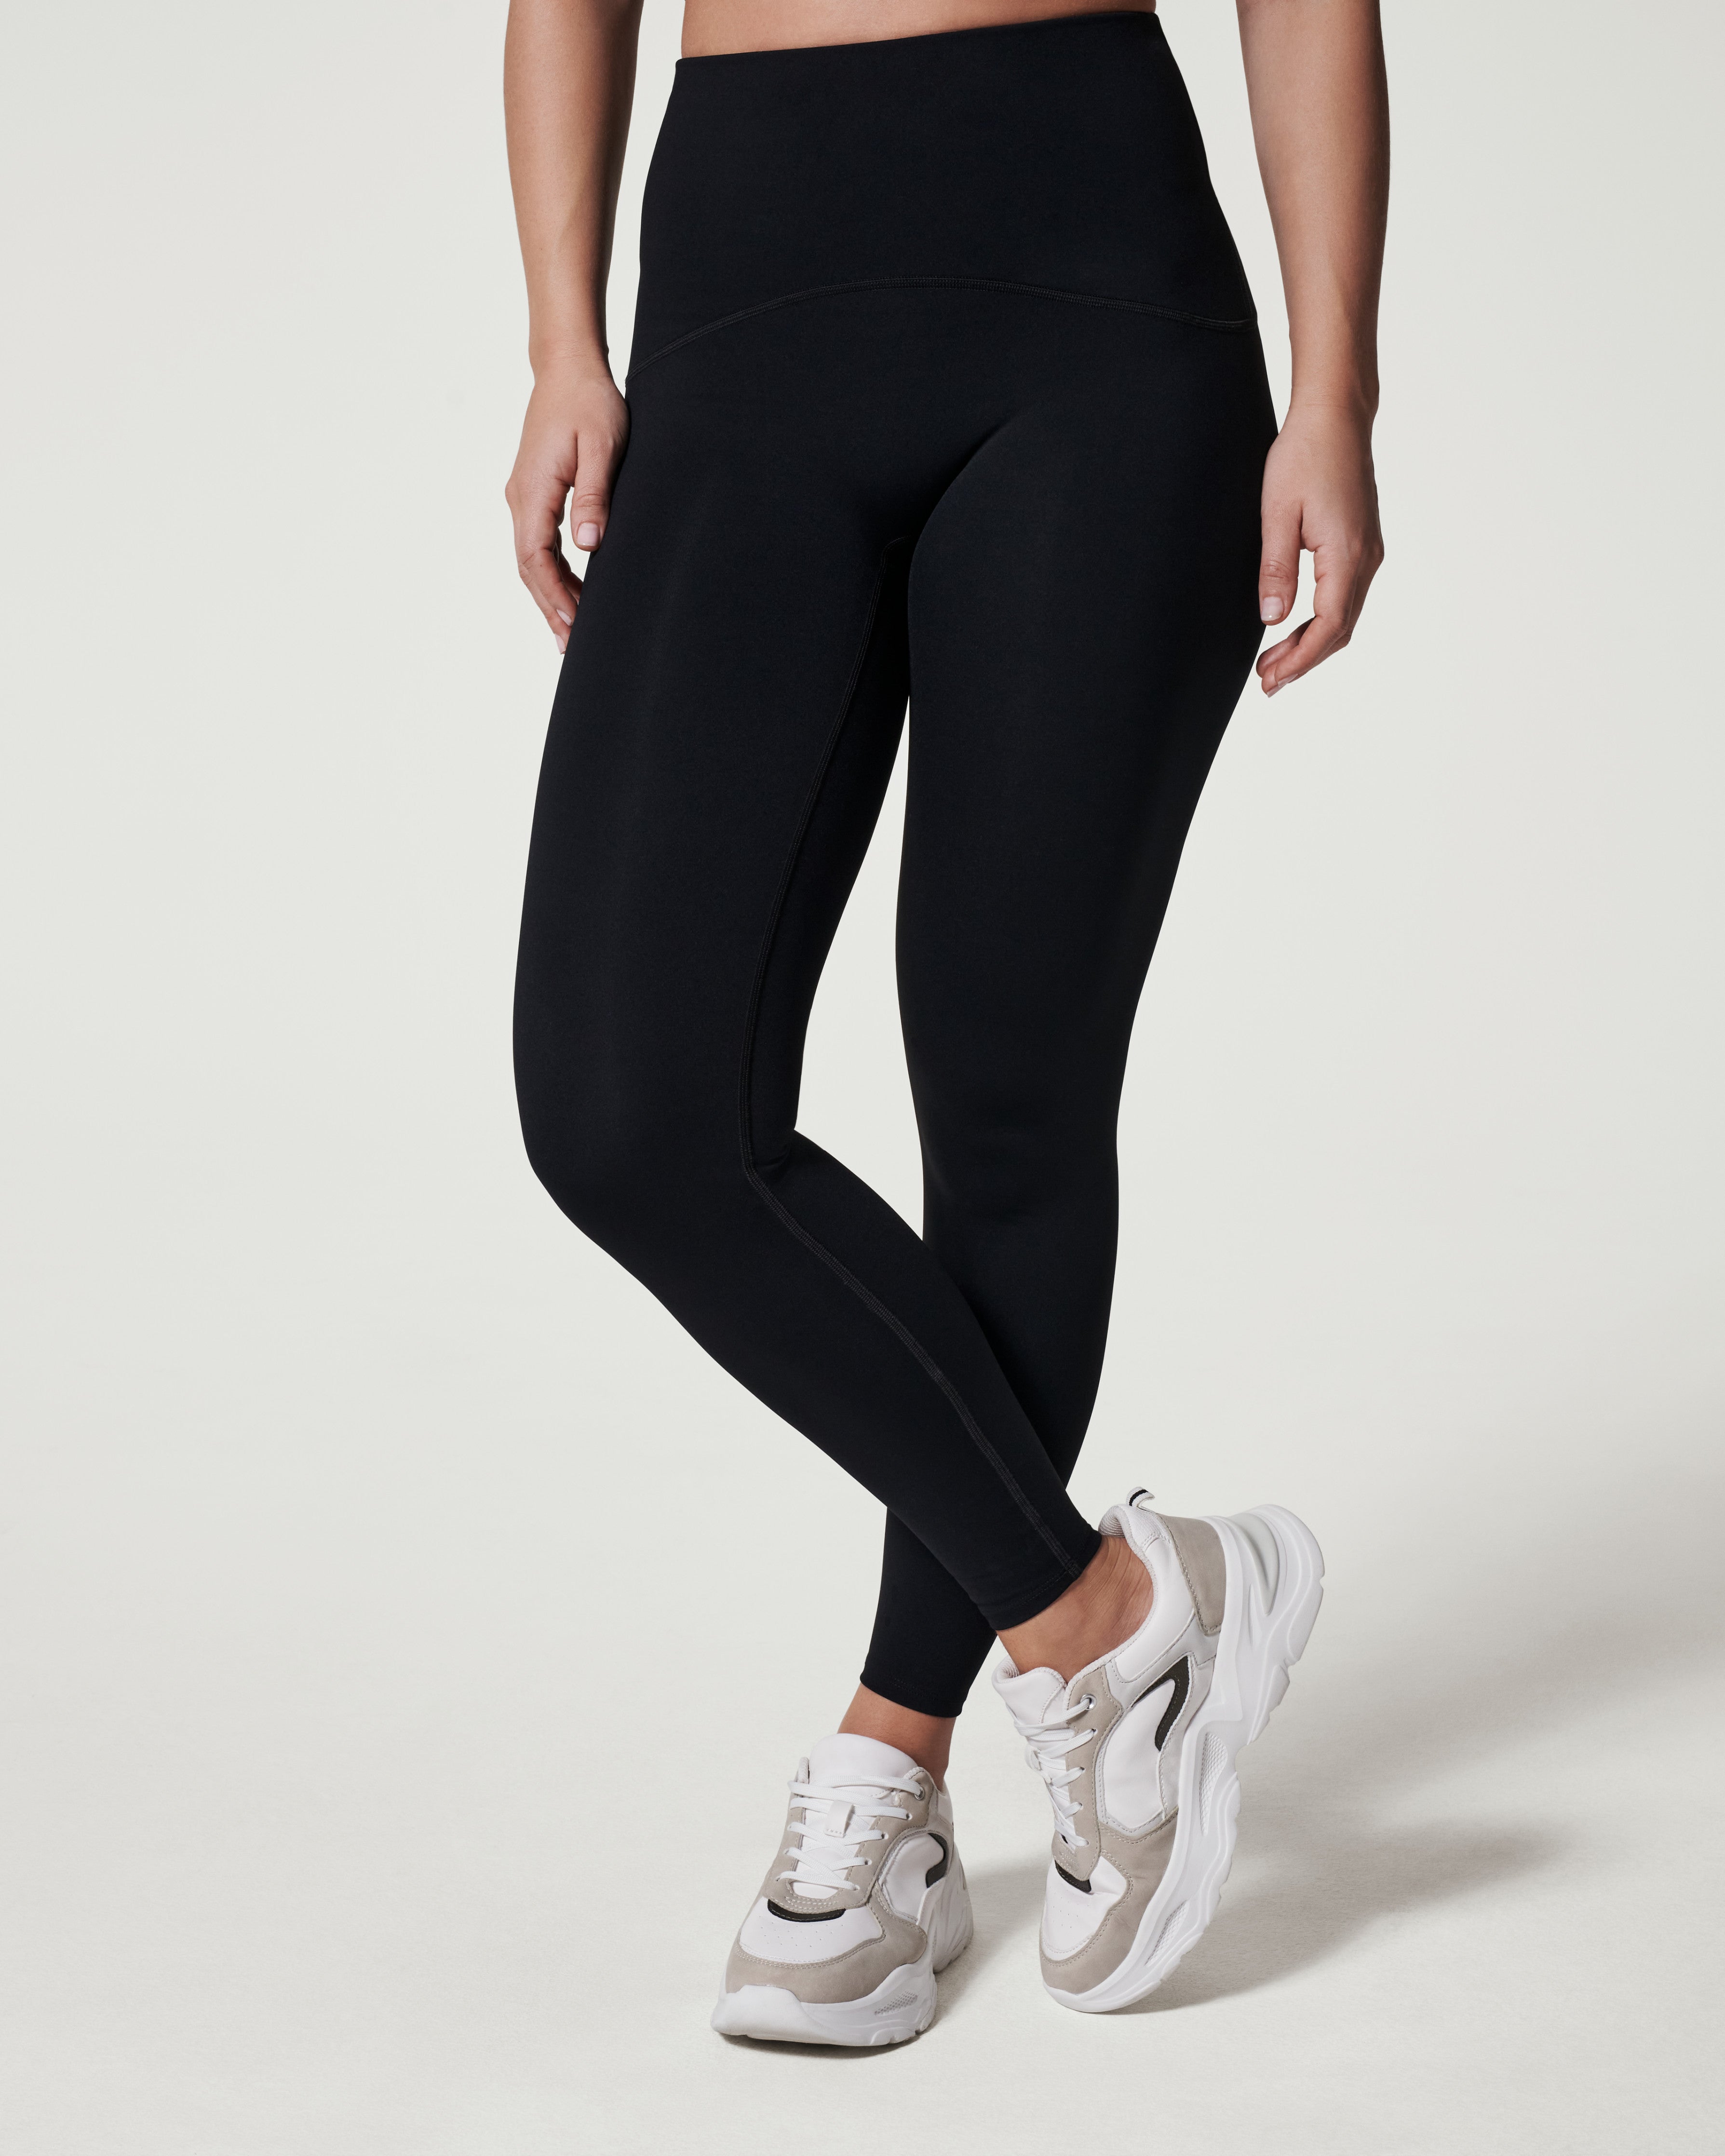 Booty Boost Leggings  The leggings known for giving you the BEST